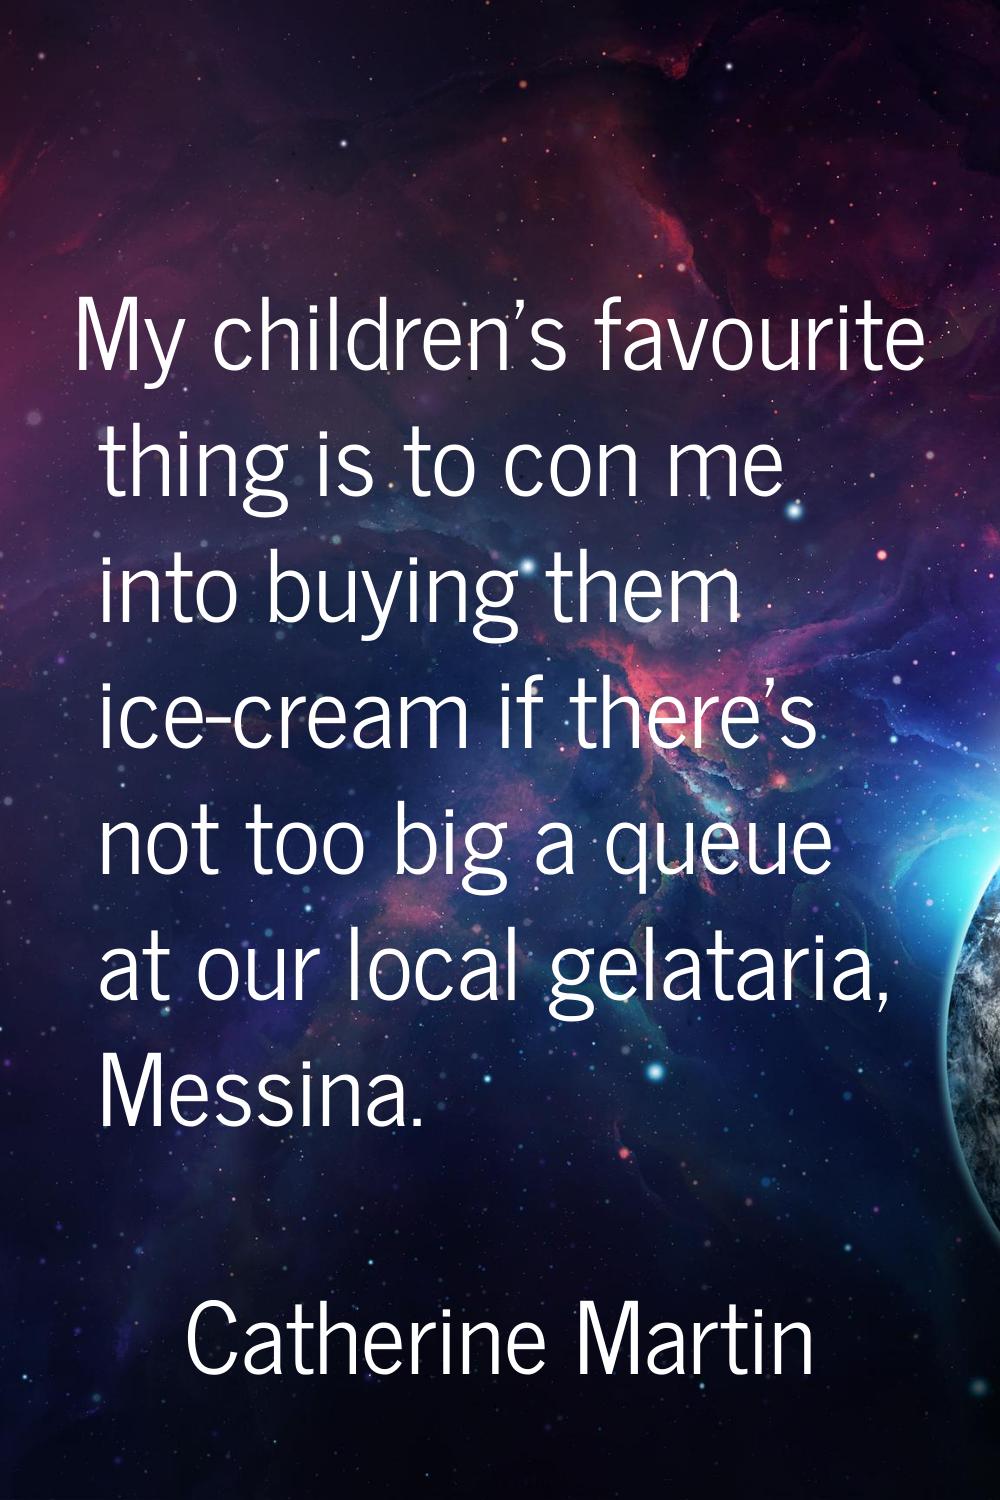 My children's favourite thing is to con me into buying them ice-cream if there's not too big a queu